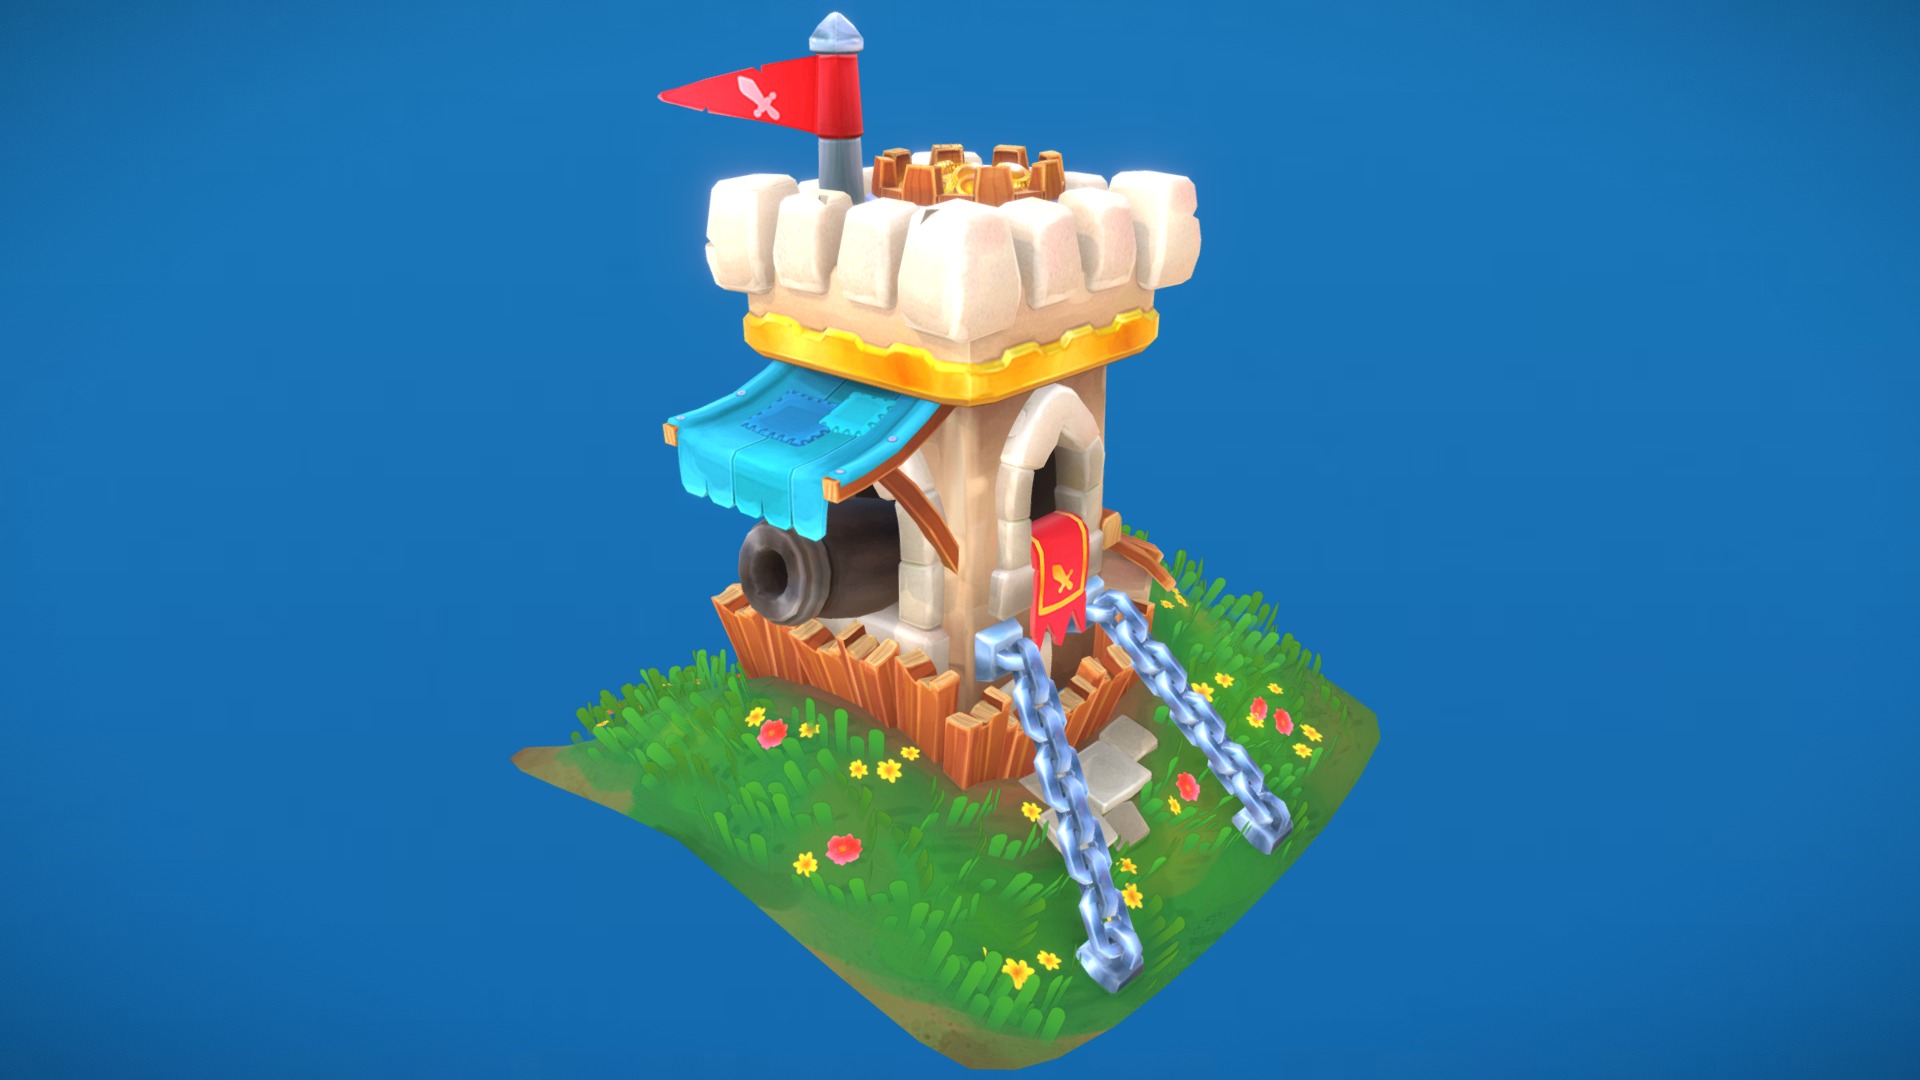 3D model Chunky Castle - This is a 3D model of the Chunky Castle. The 3D model is about a green and blue toy tank.